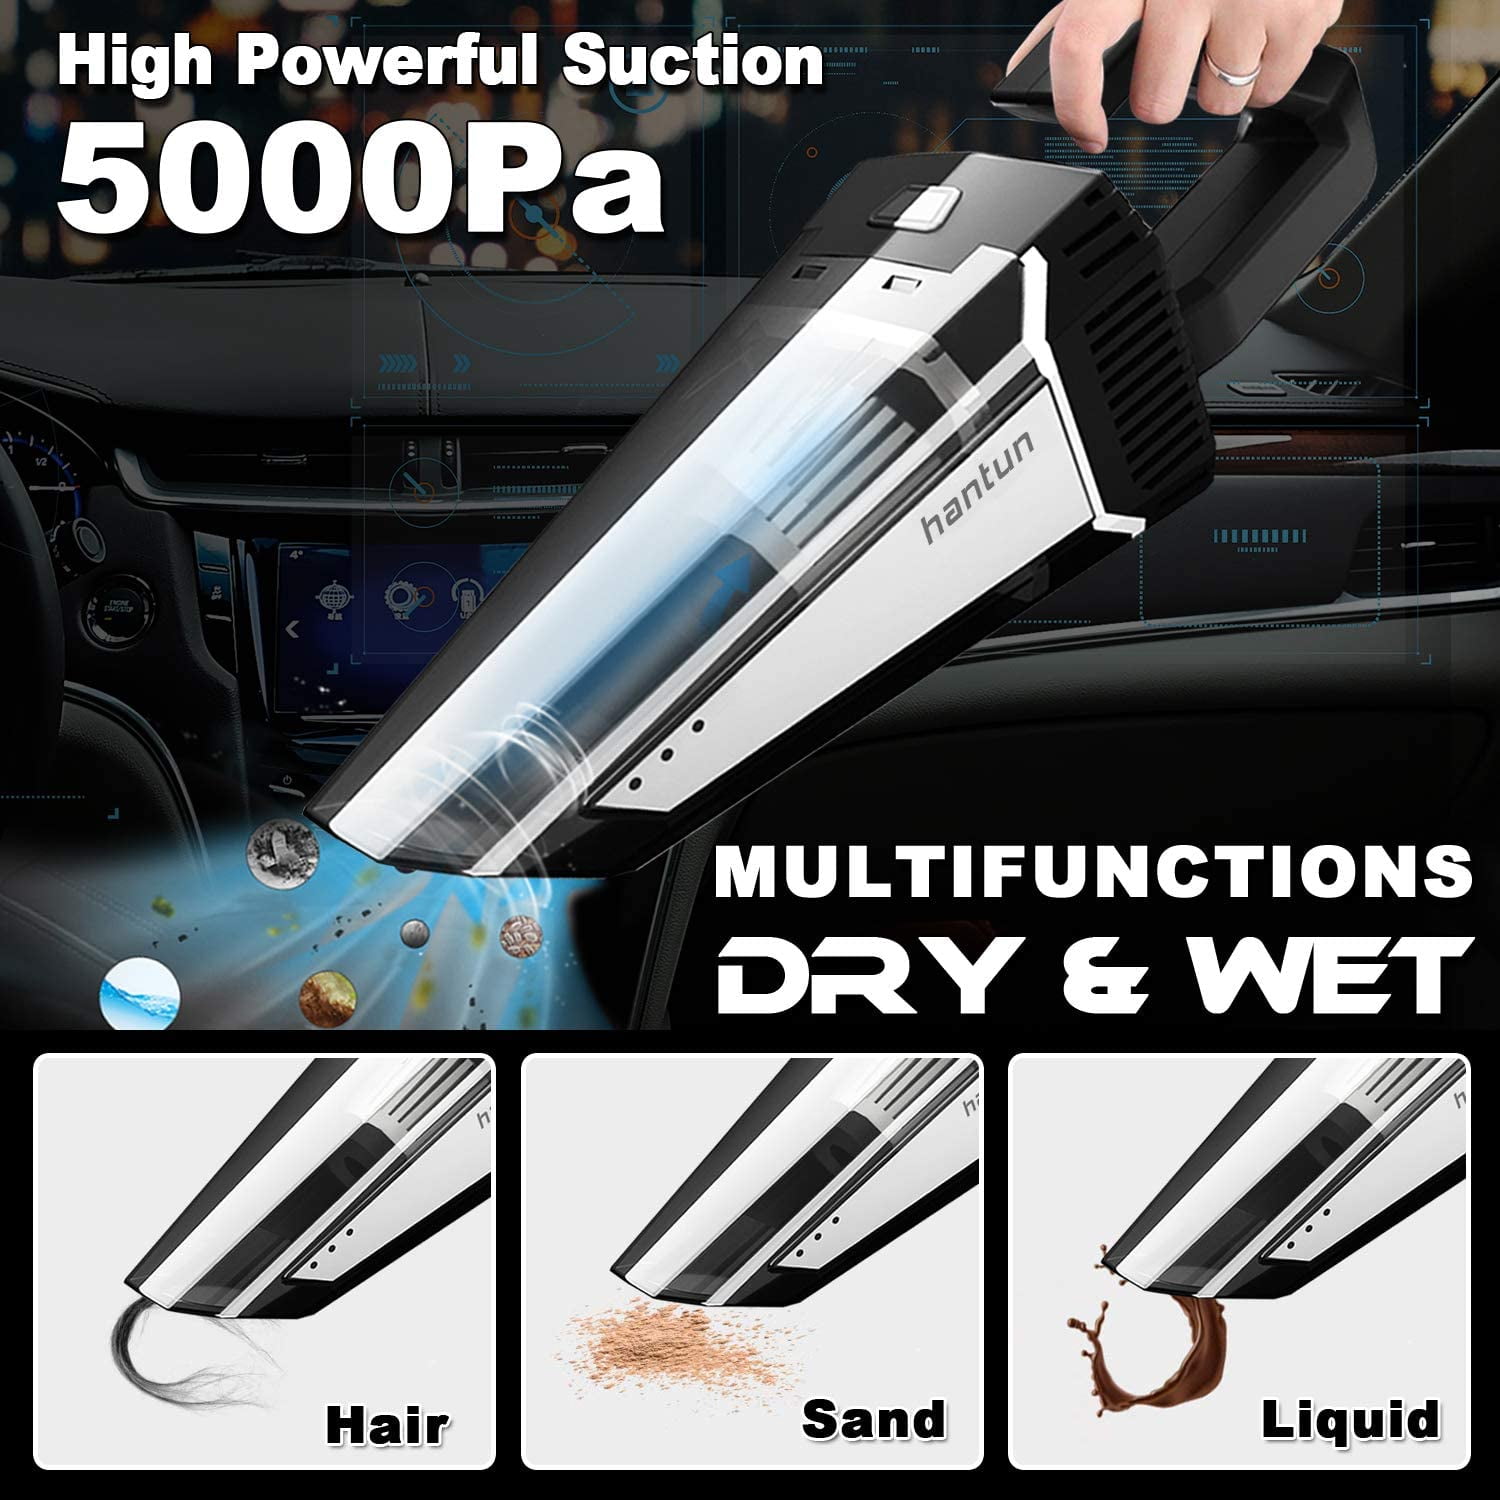 for Car Cleaning Car Vacuum Hantun Corded 12V 120W 5000Pa High Power Portable Handheld Vacuum Cleaner with 16.4FT Strong Aluminum Fan Power Cord 5M Wet/Dry Use 2 HEPA Filter 